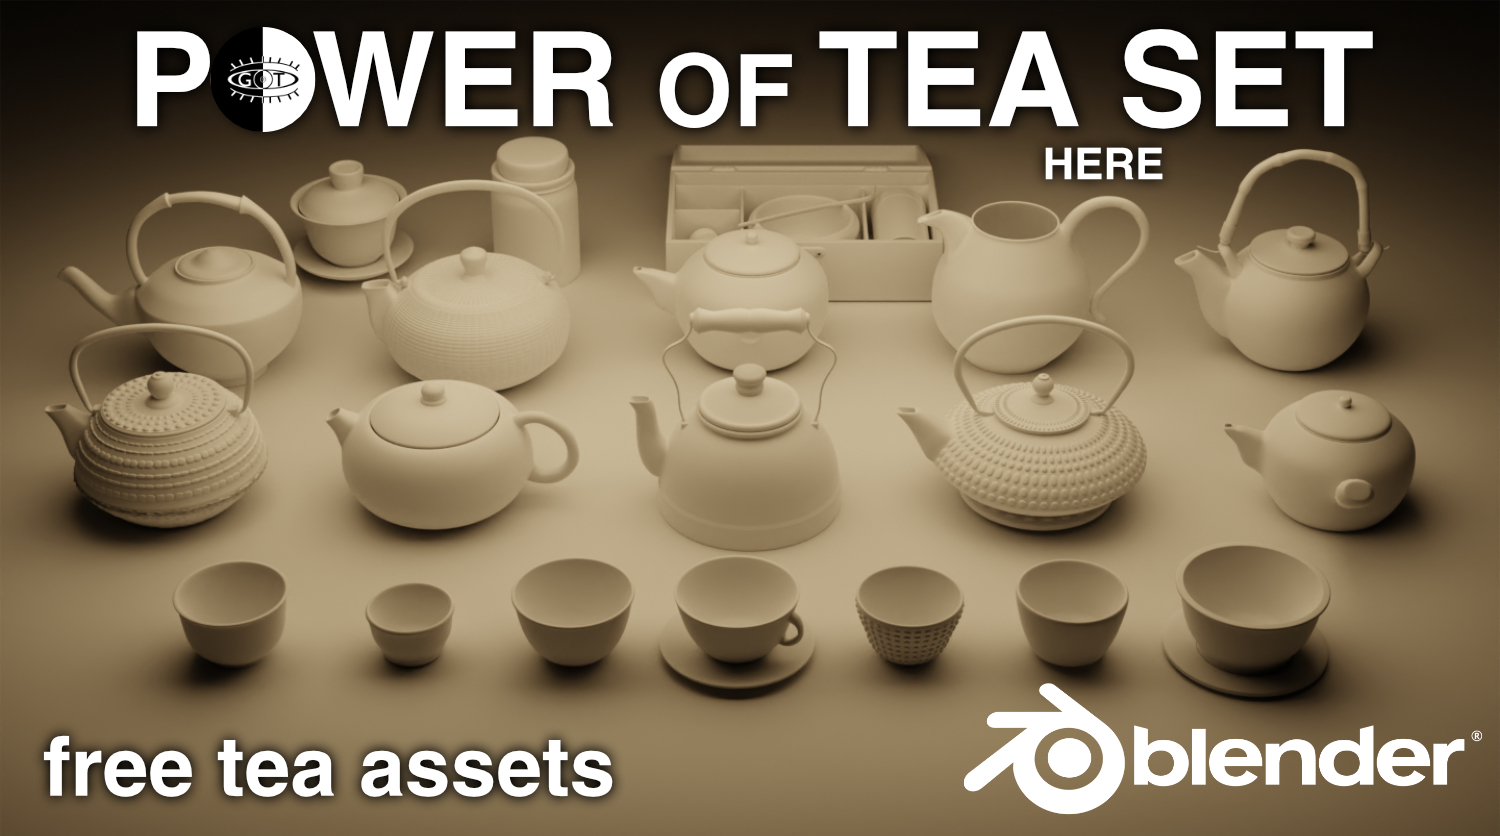 Power of tea sets 2022 preview image 1